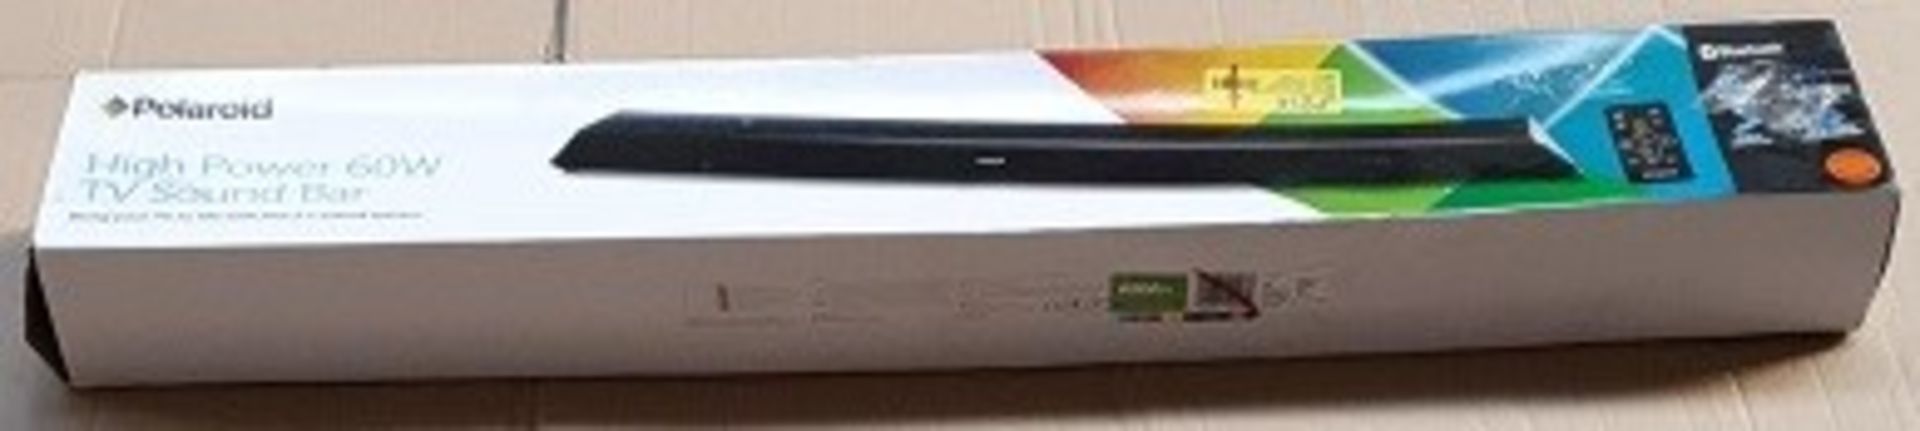 1 BOXED POLAROID HIGH POWER 60W TV SOUND BAR / RRP £59.00 - BL -3781 (VIEWING HIGHLY RECOMMENDED)